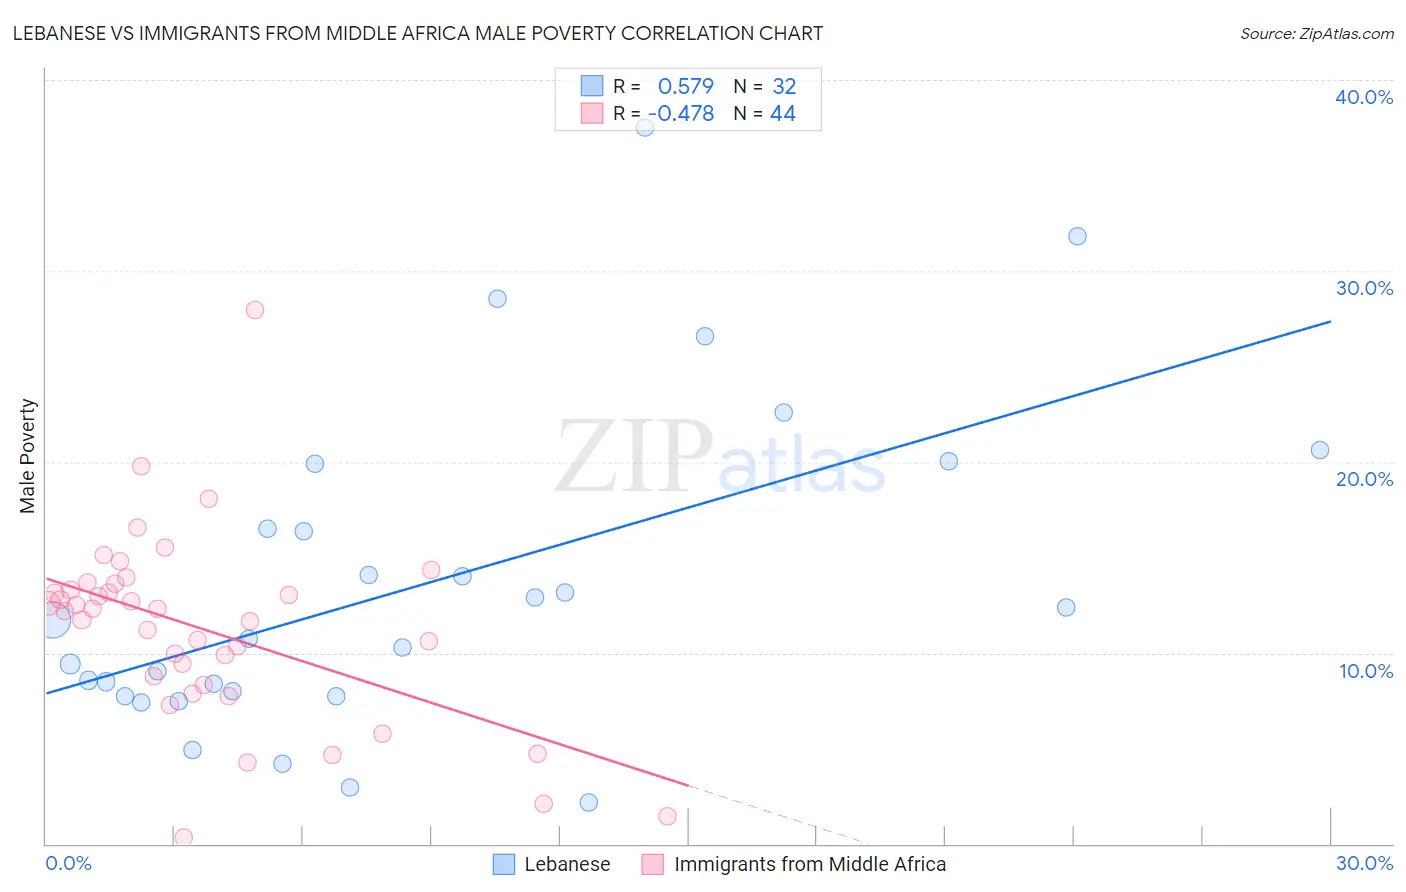 Lebanese vs Immigrants from Middle Africa Male Poverty